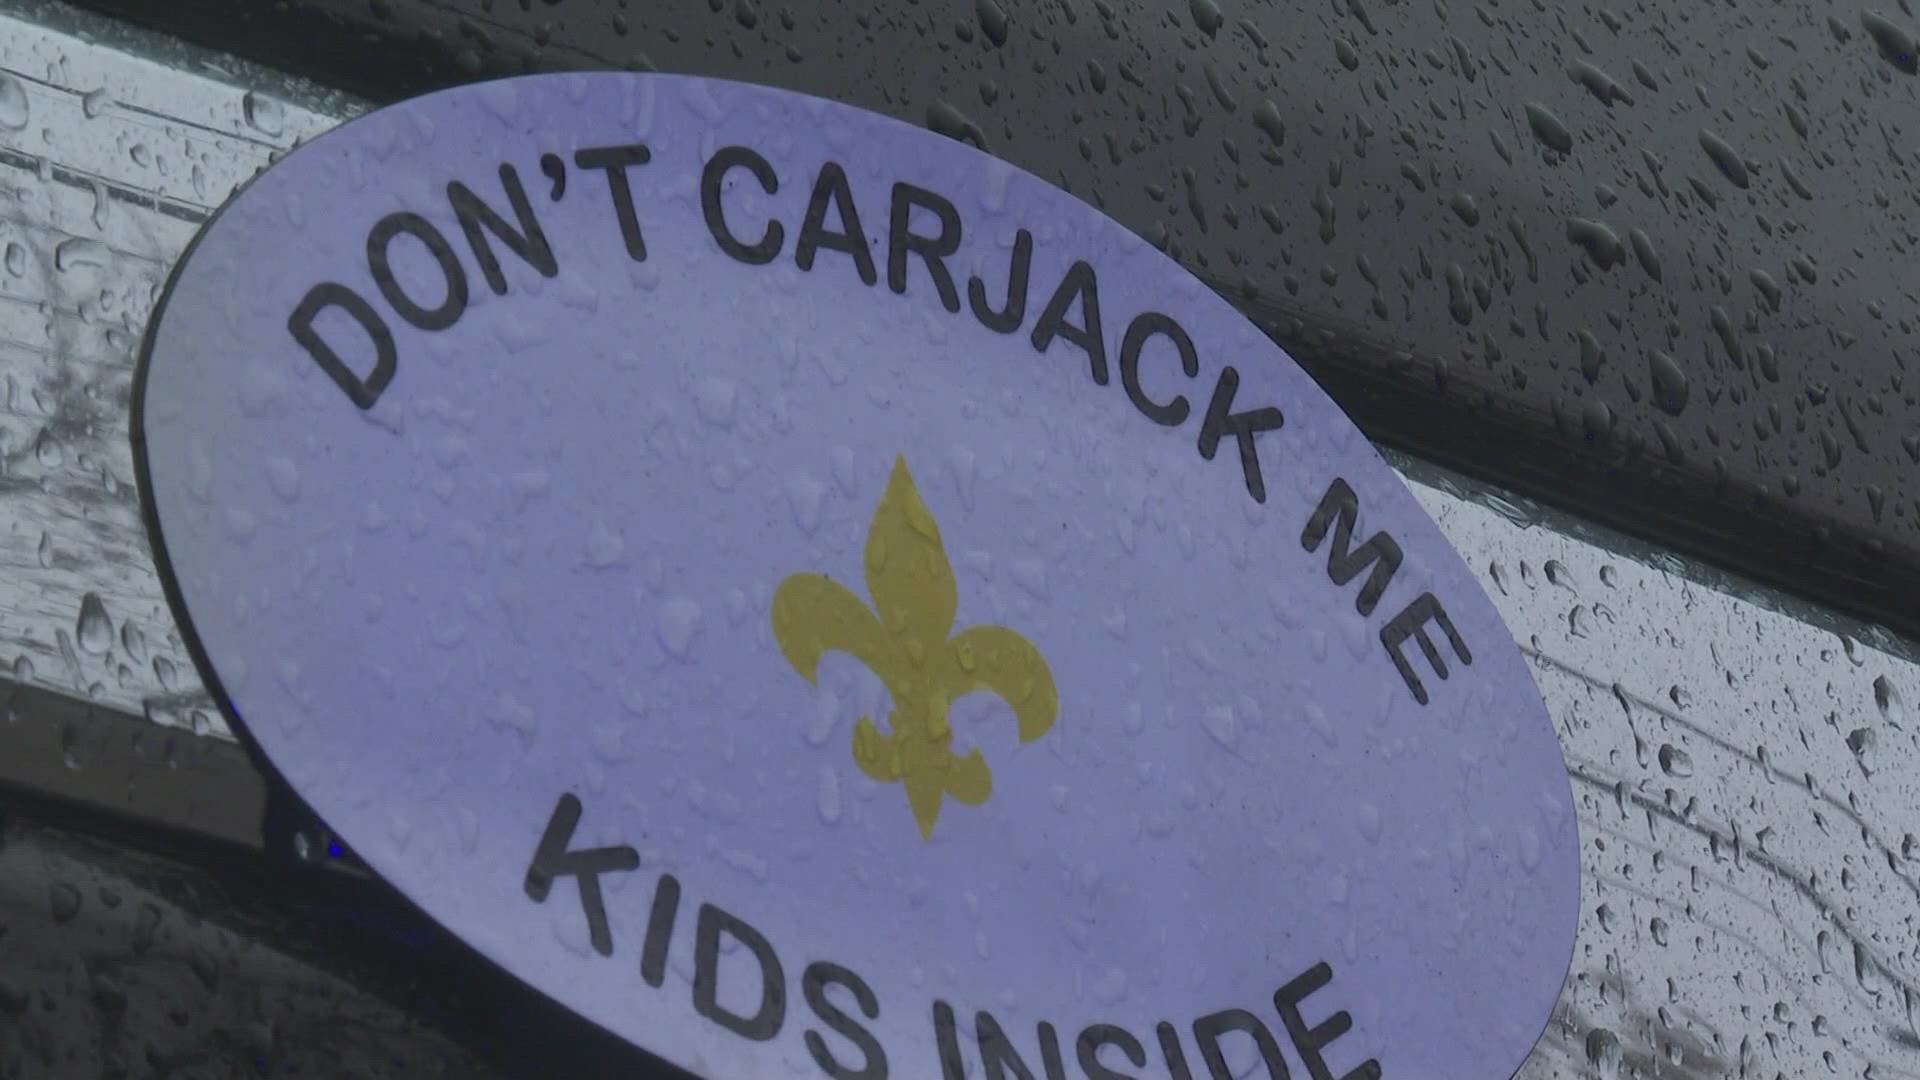 A local mom is sending out a message in a safe way in hopes to slow the occurrences and protect families from carjackers.